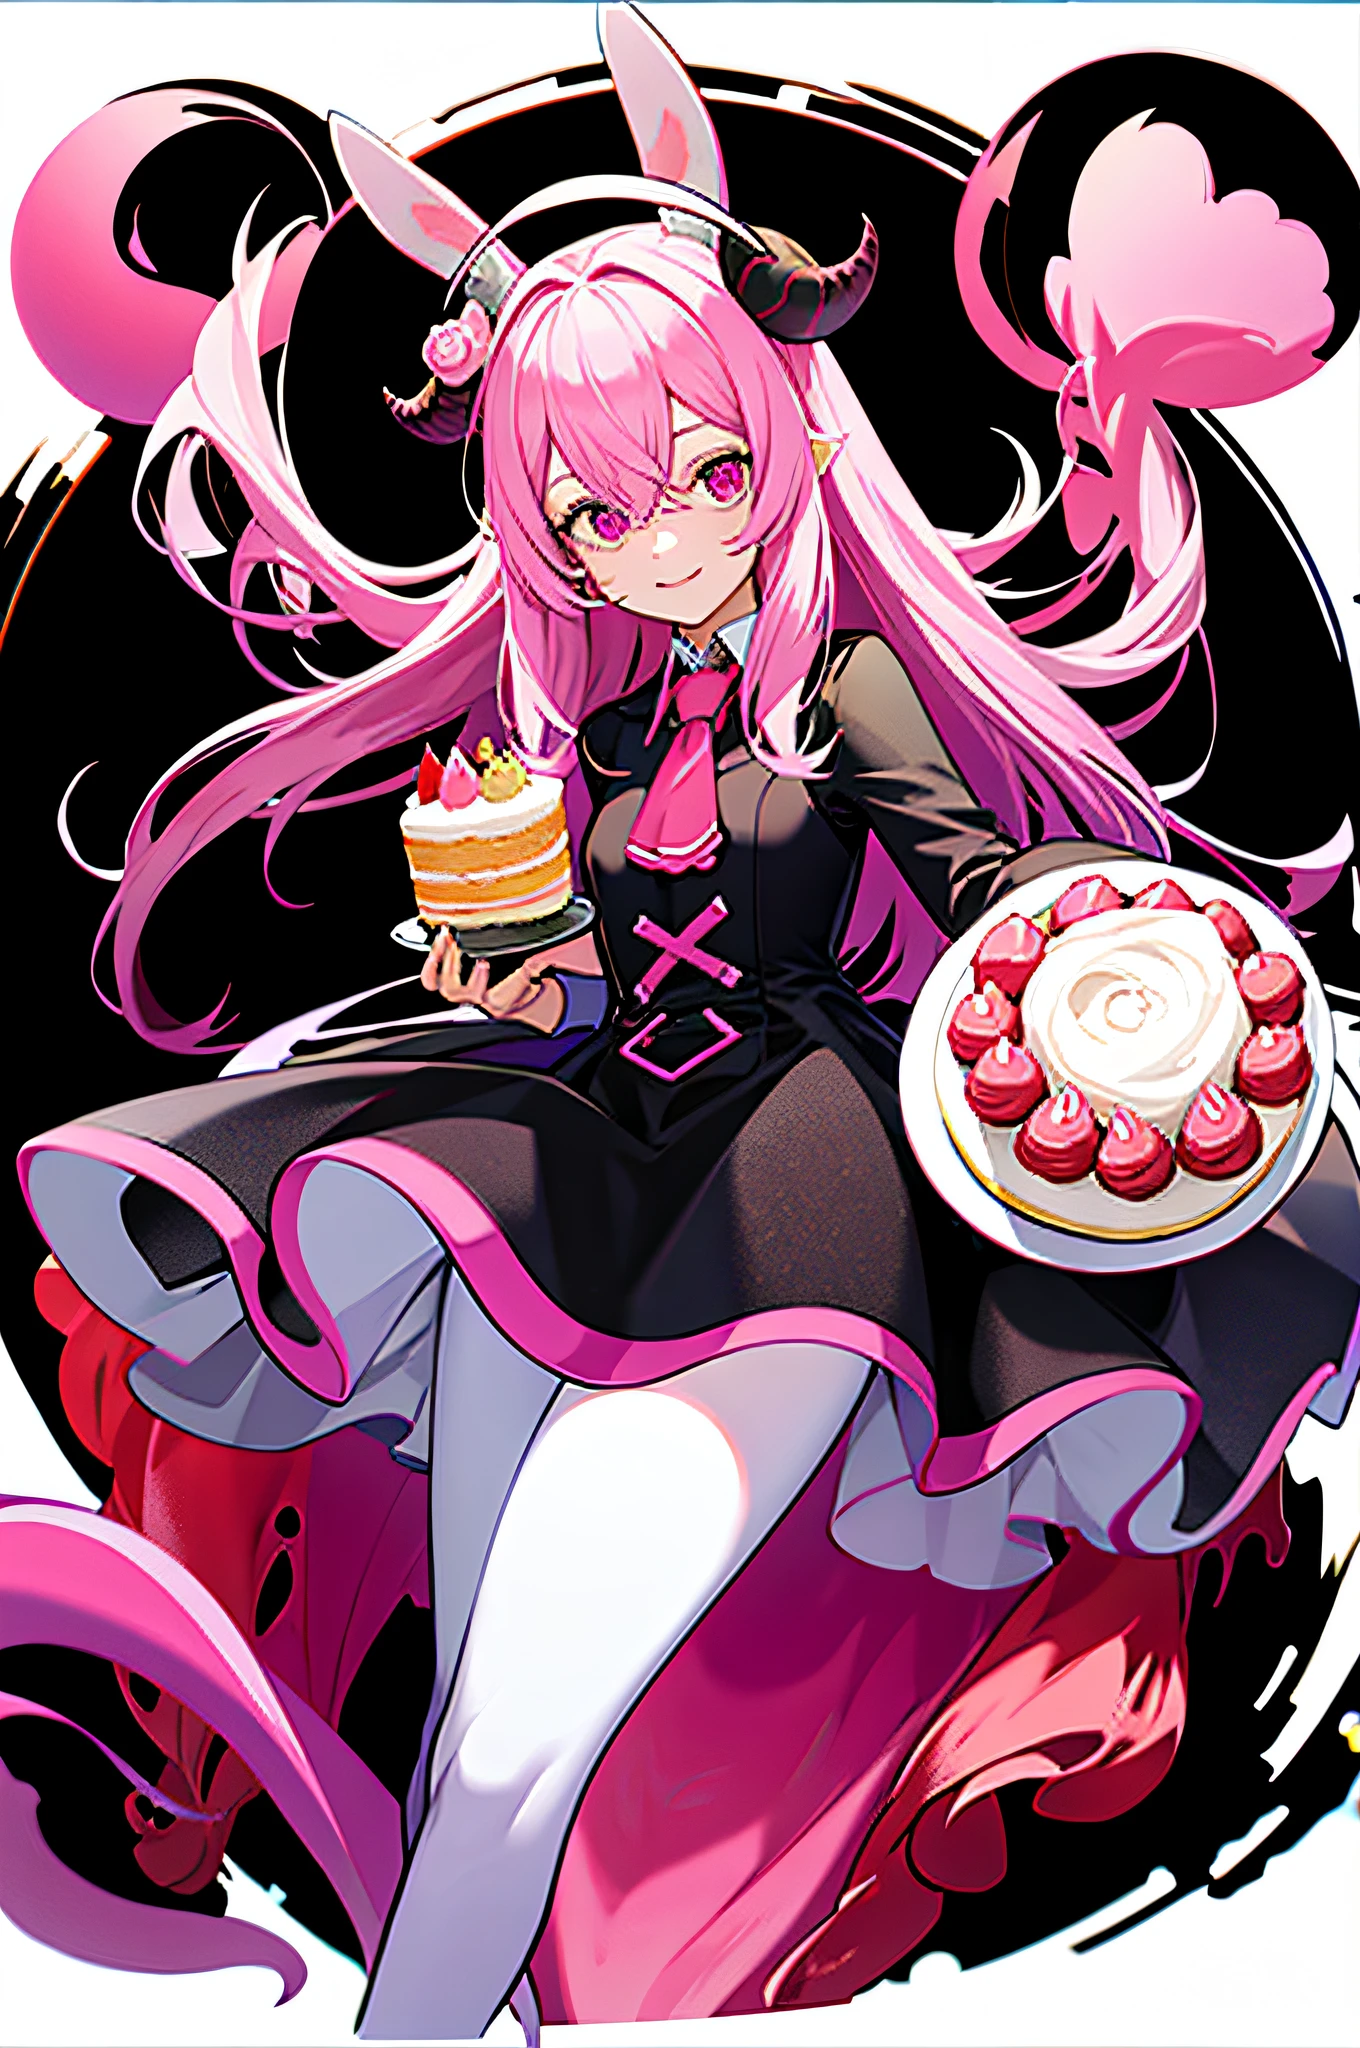 official art, unity 8k wallpaper, ultra detailed, beautiful and aesthetic, High quality, beautiful, masterpiece, best quality, (zentangle, mandala, tangle, entangle:0.6), flat color, limited palette, low contrast, a cute girl serving cake to demons, pink, bright pastel colors, kawaii, (horror), eerie, rabbit skull, goat skull, in hell, creepy, demons, claws, best lighting